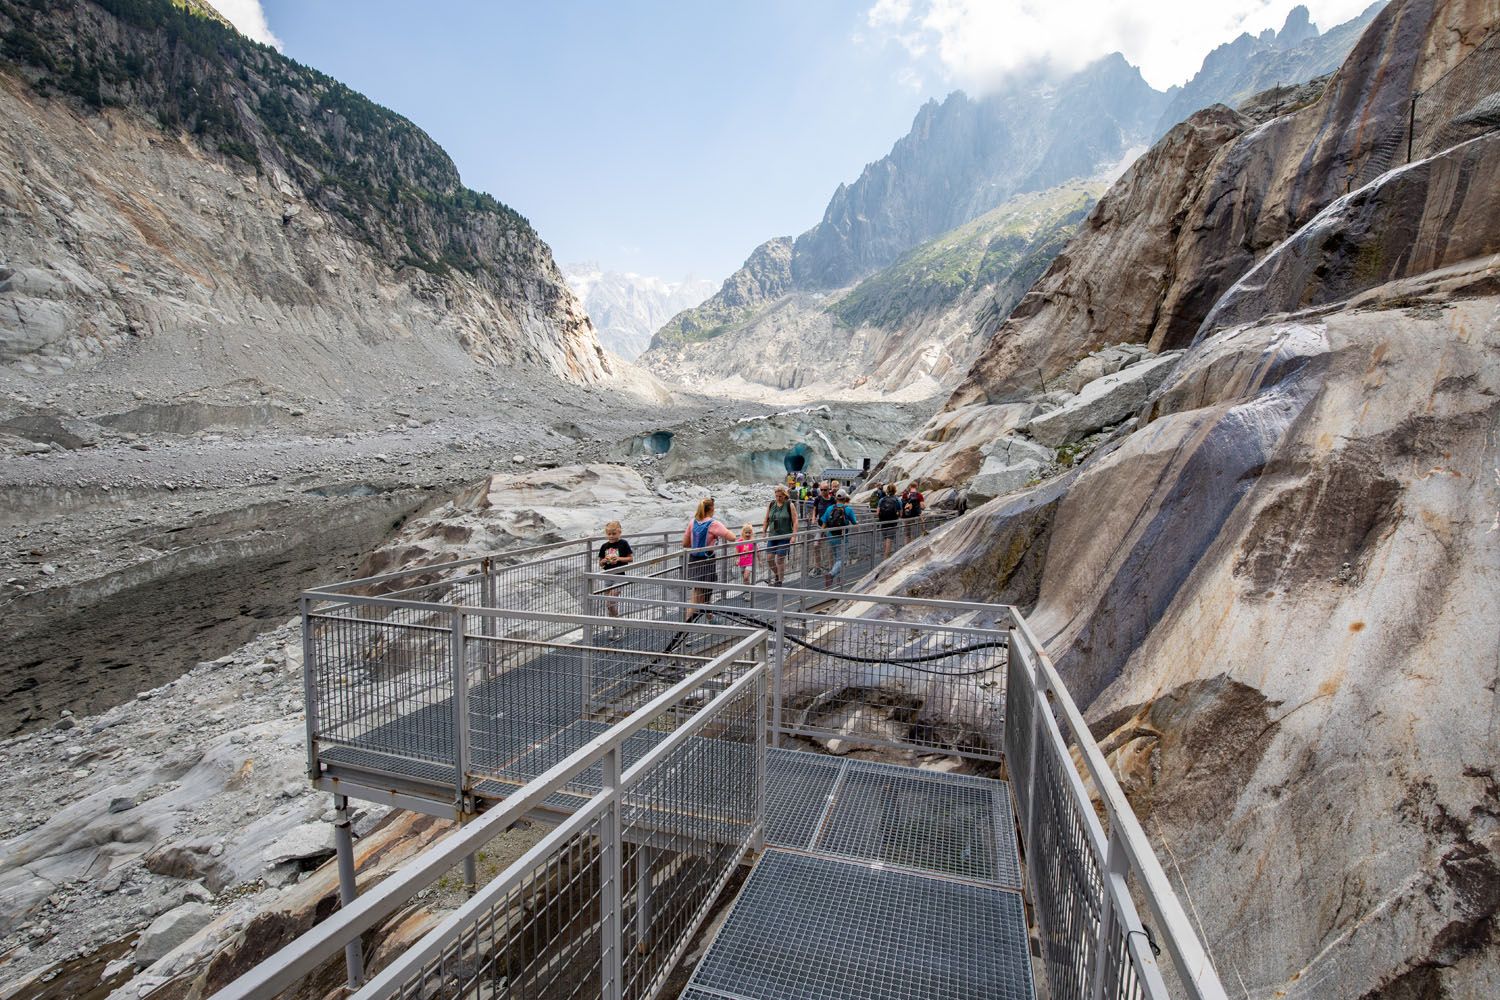 How to Get to Mer de Glace